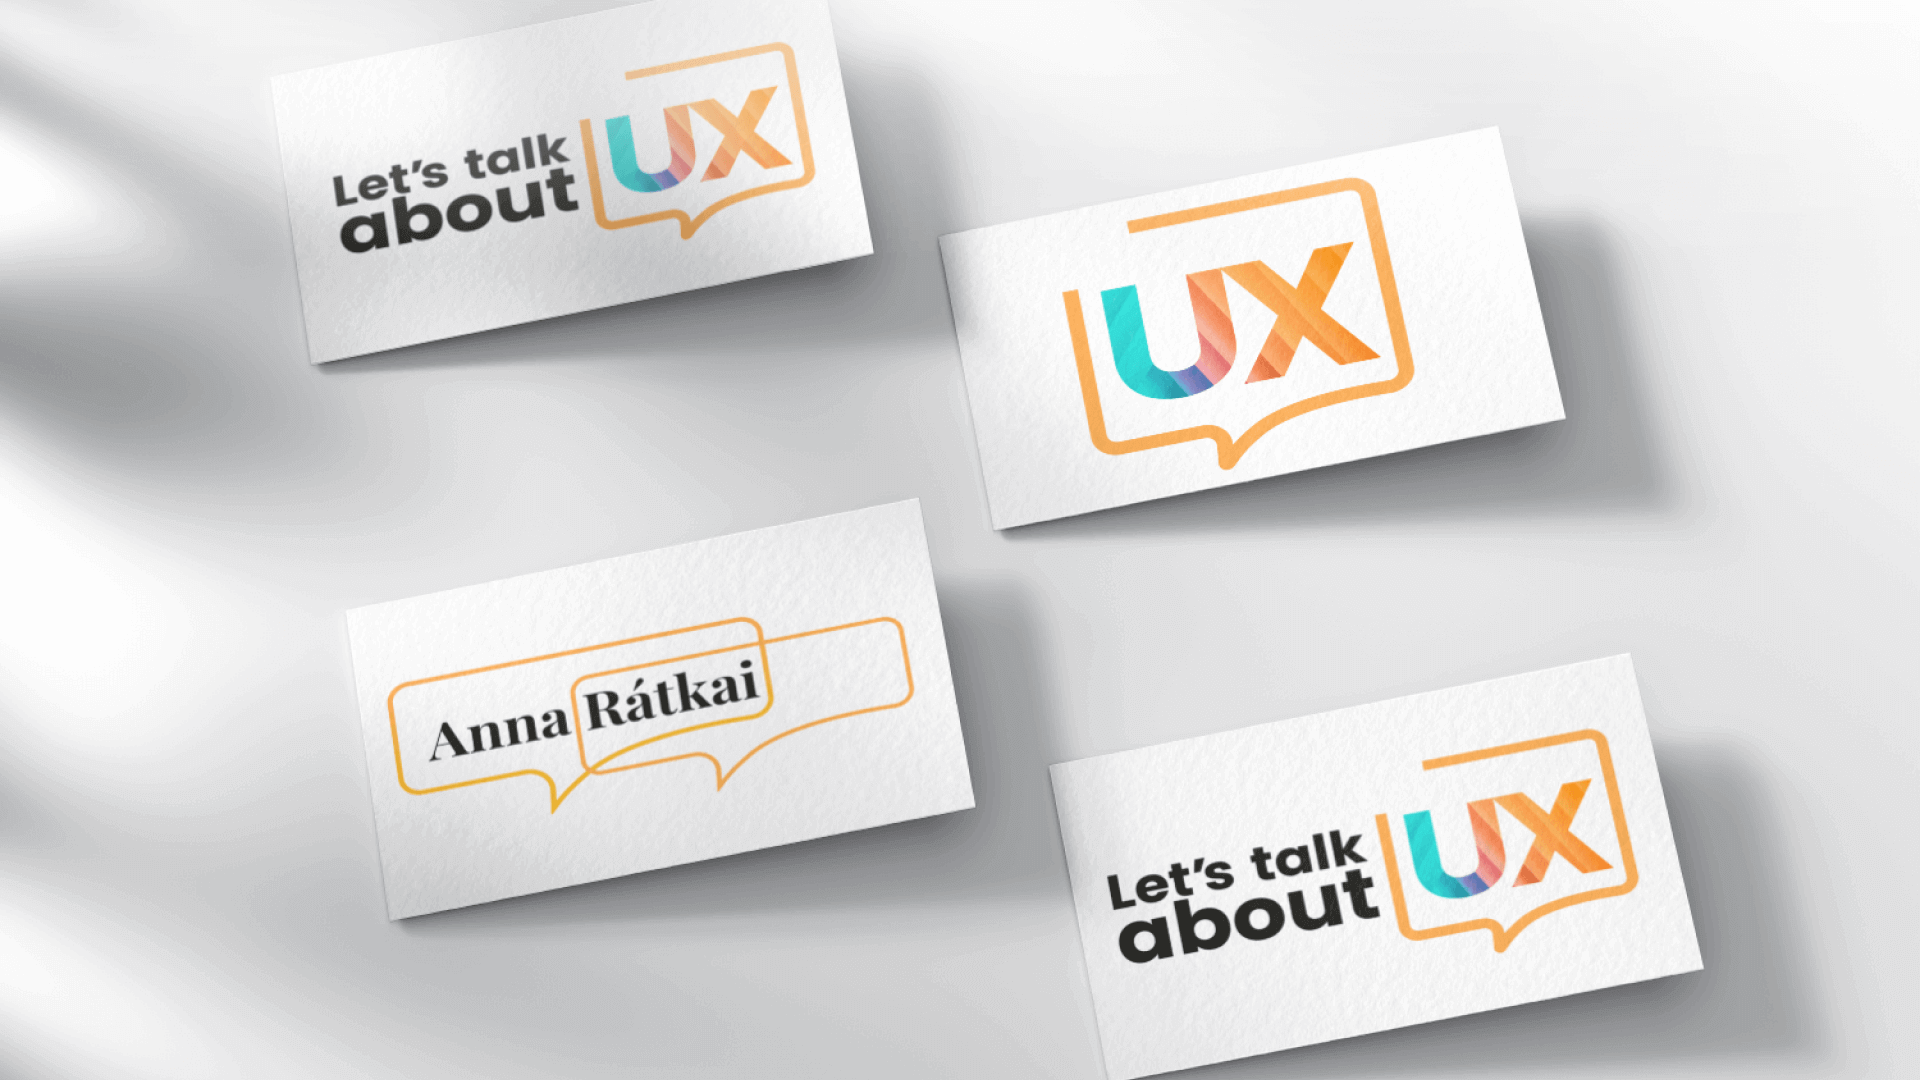 Four business cards